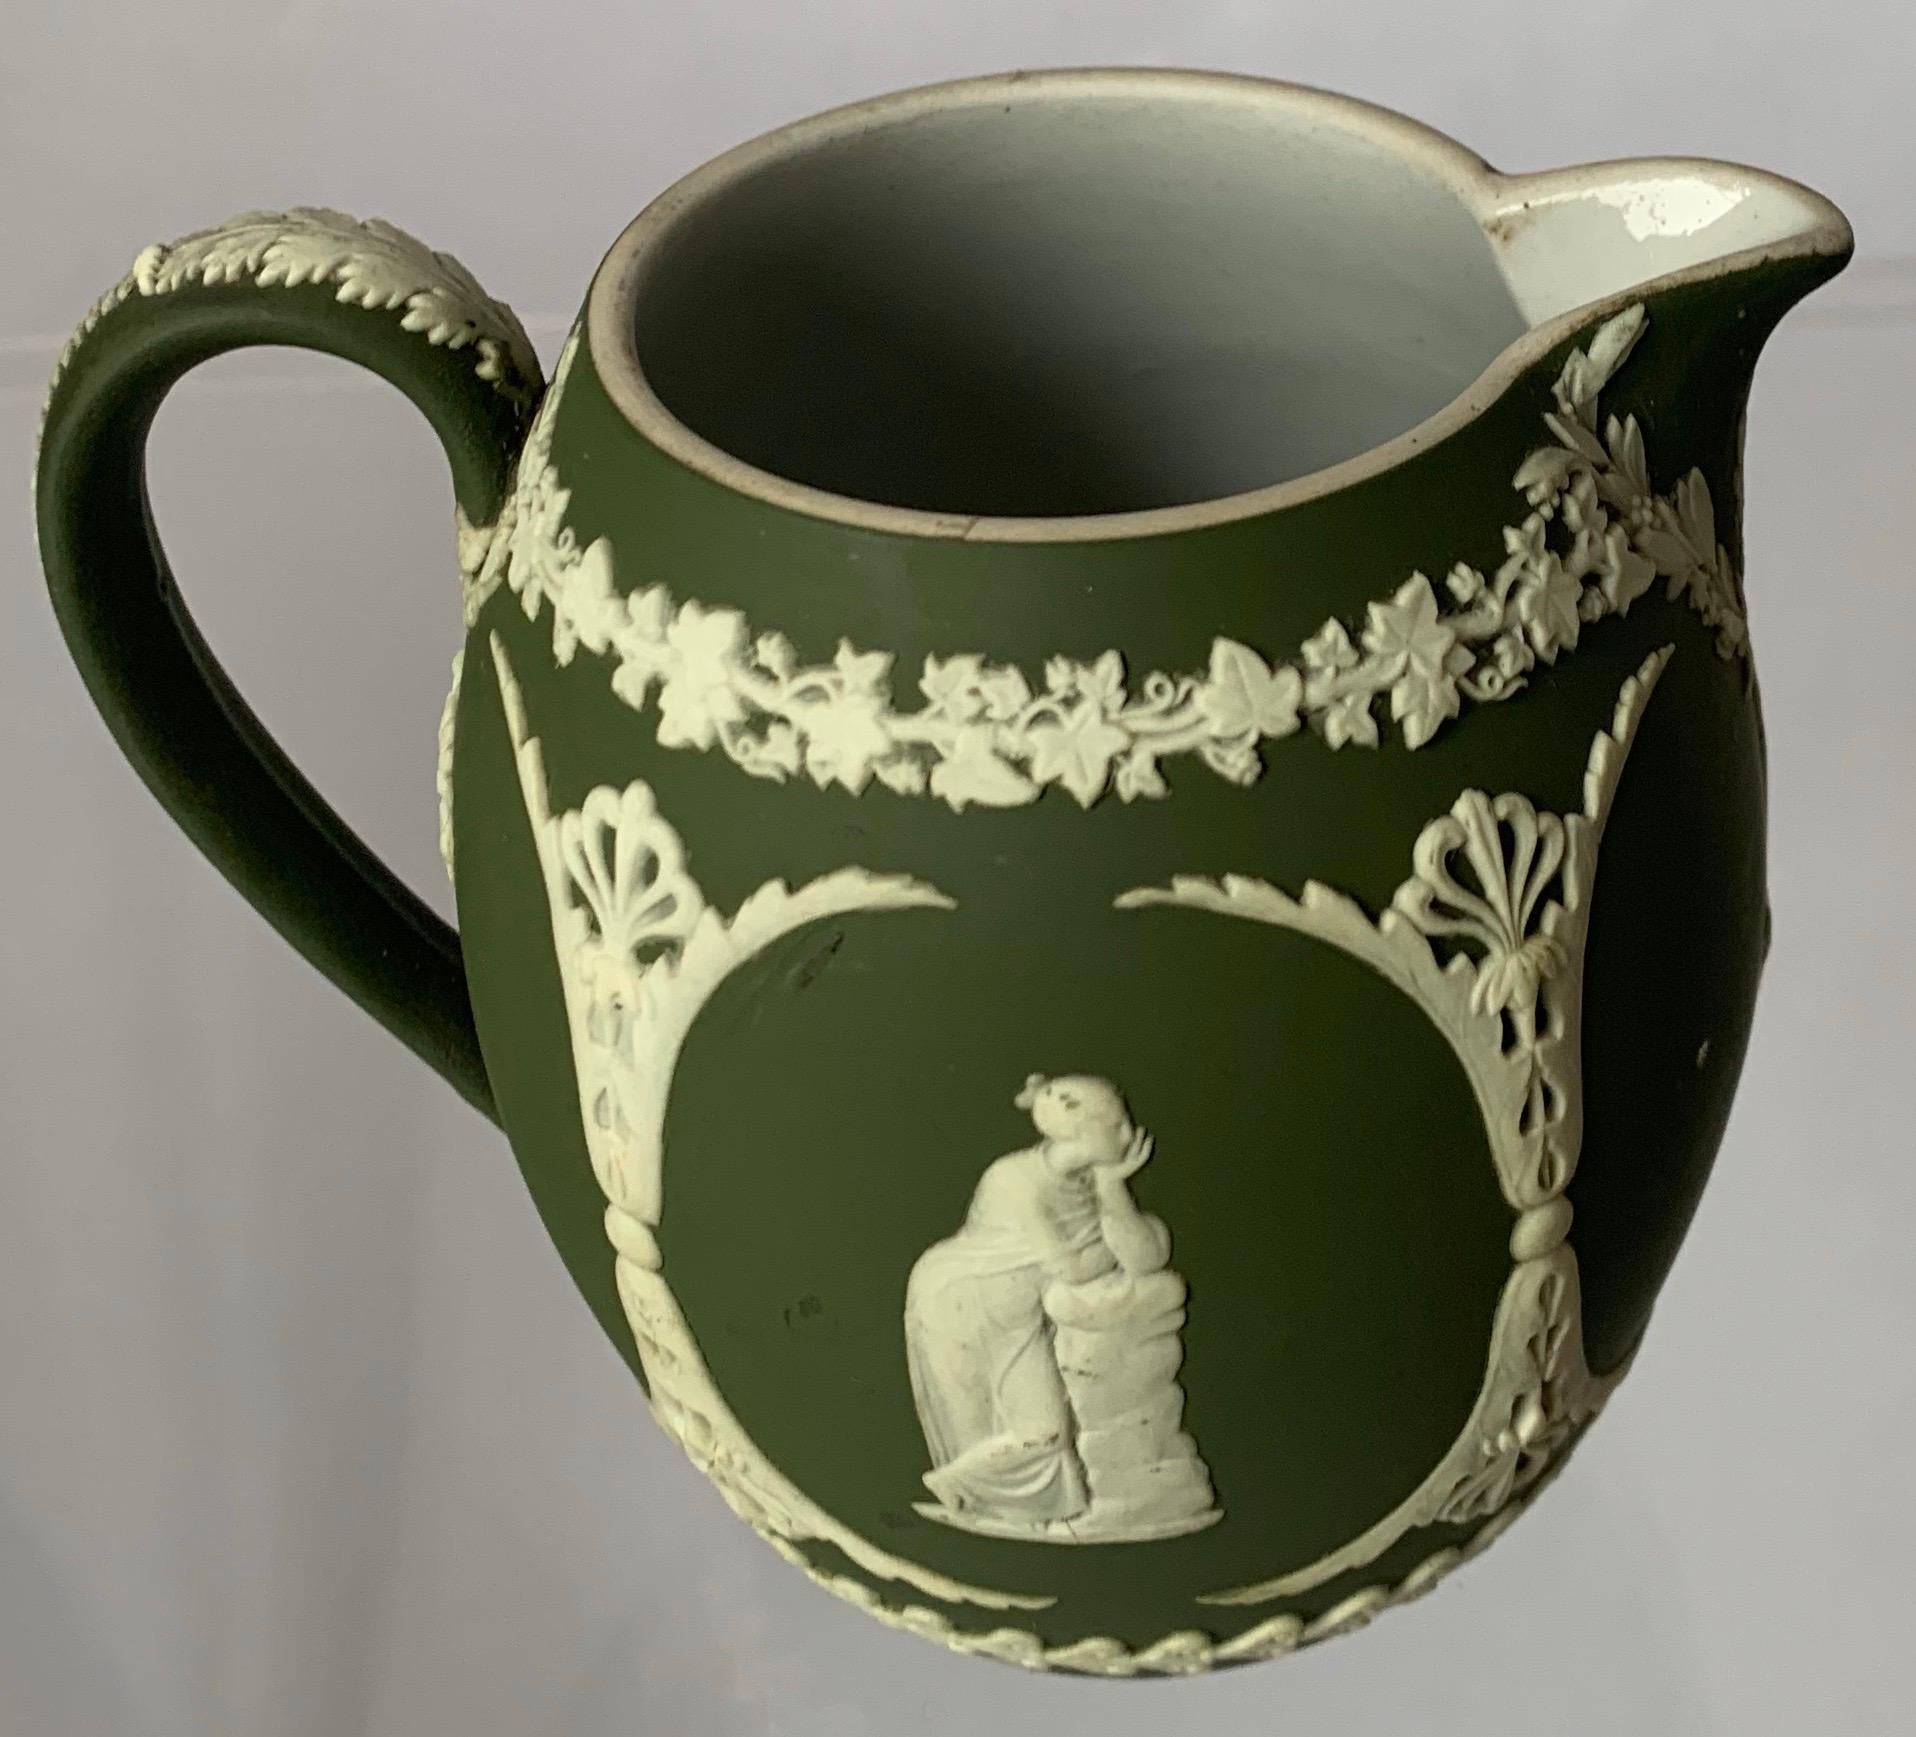 1940s Wedgwood small light green jasperware pitcher or creamer featuring a neoclassical motif. Interior of the pitcher is glazed. Stamped Wedgwood on the underside and stamped 48 indicating it was made in 1948.